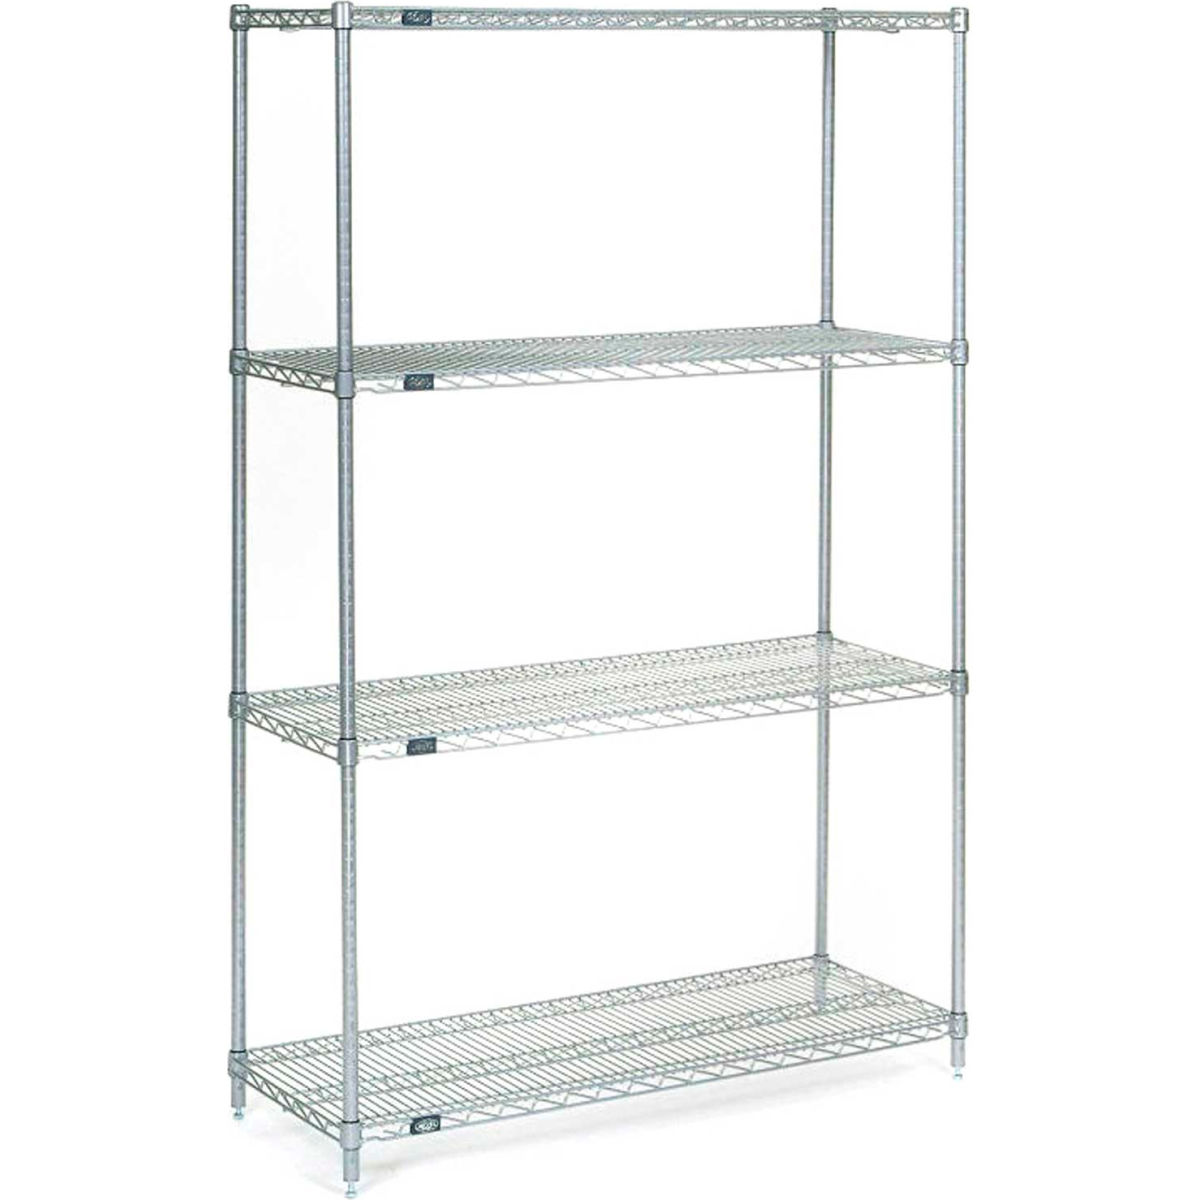 Picture of Global Industrial 14366S 63 x 36 x 14 in. Nexel Stainless Steel Starter Wire Shelving